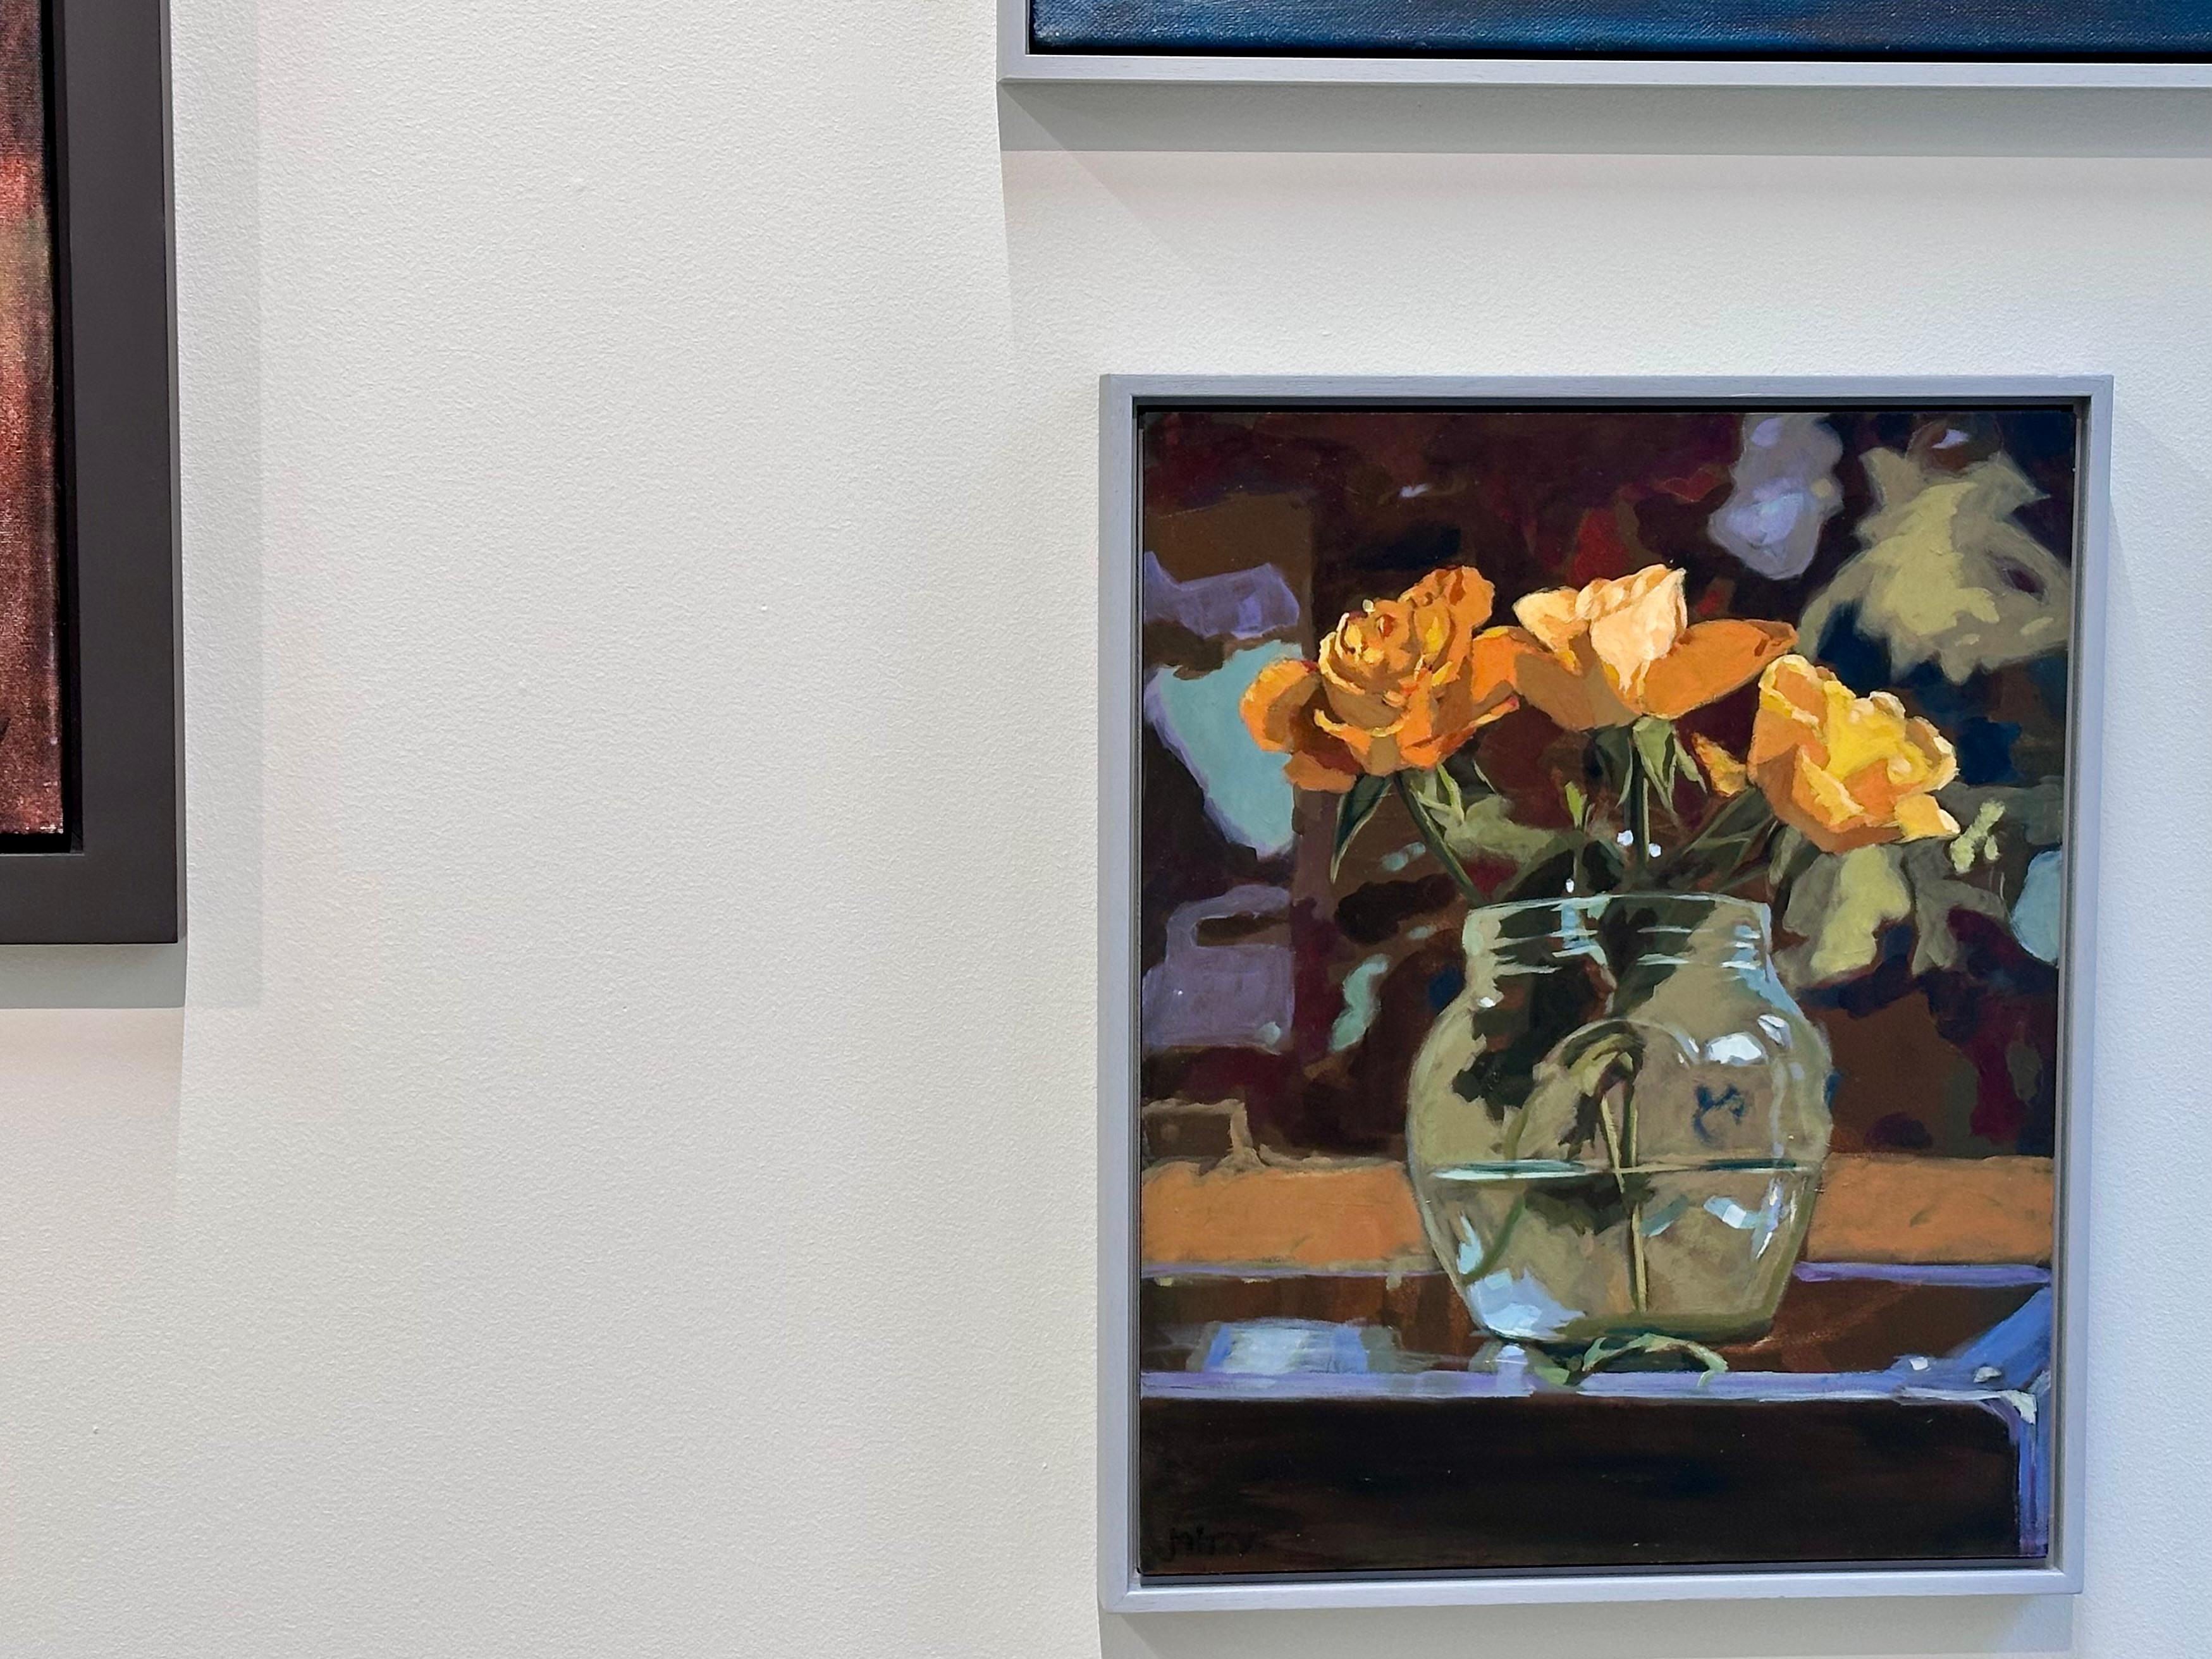 Mitzy Renooy
Yellow Roses
50 x 40 cm
Frame included in price, size with frame: 55 x 45 cm

Dutch artist Mitzy Renooy, a former camera woman for national television, did follow art academy to learn to paint in an own style. Her education was a great